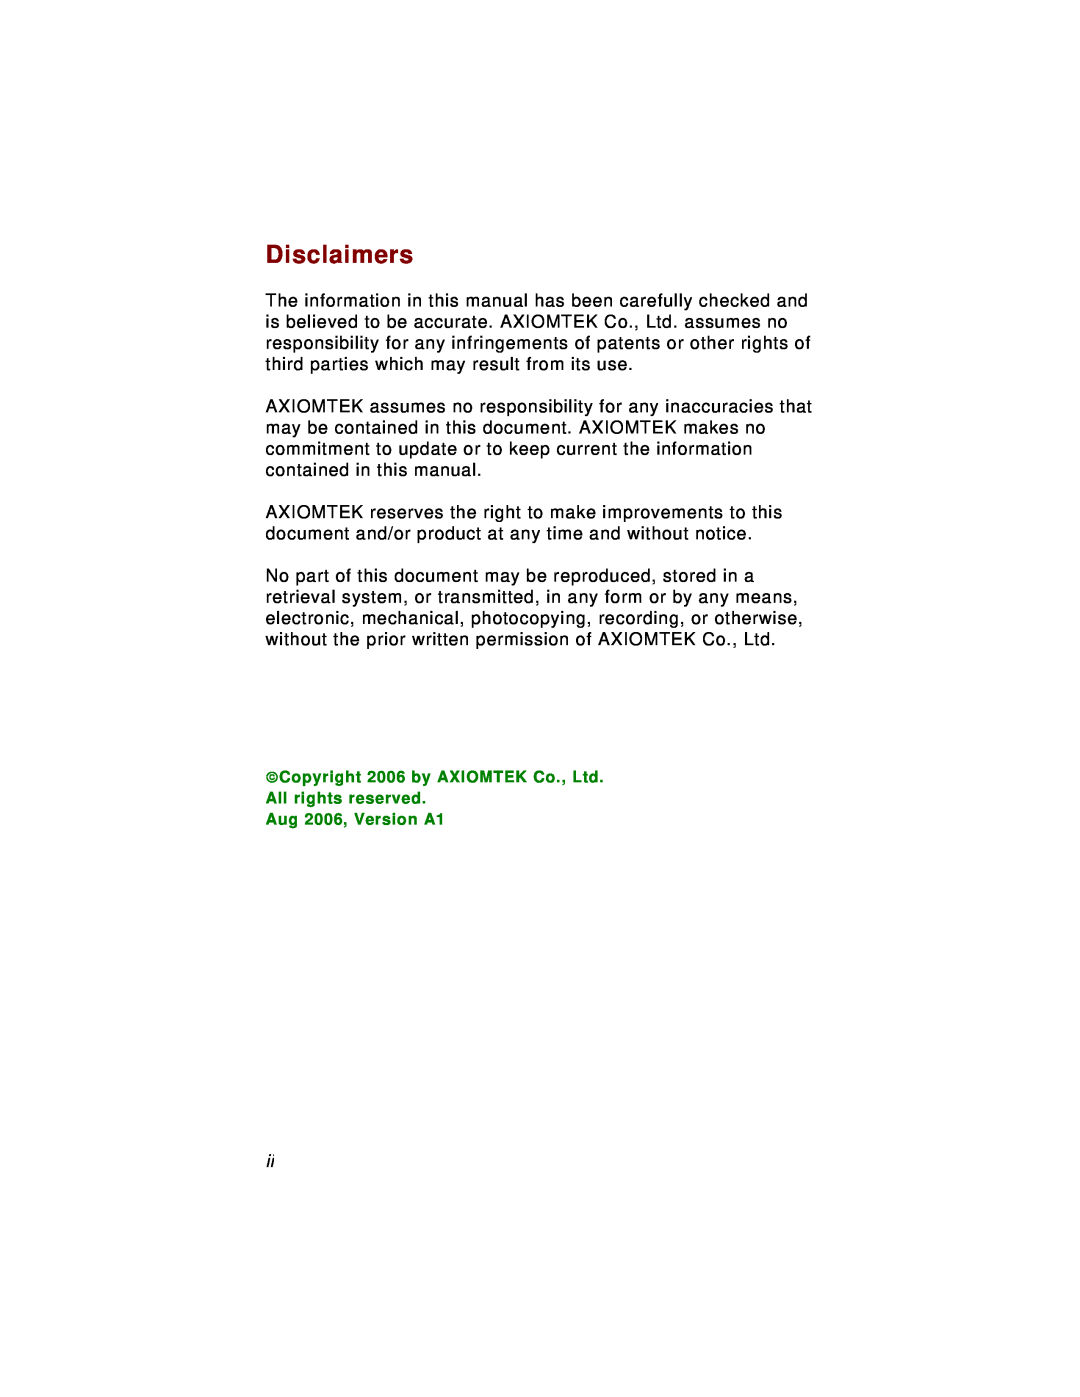 Intel IMB200VGE user manual Disclaimers, All rights reserved. Aug 2006, Version A1 